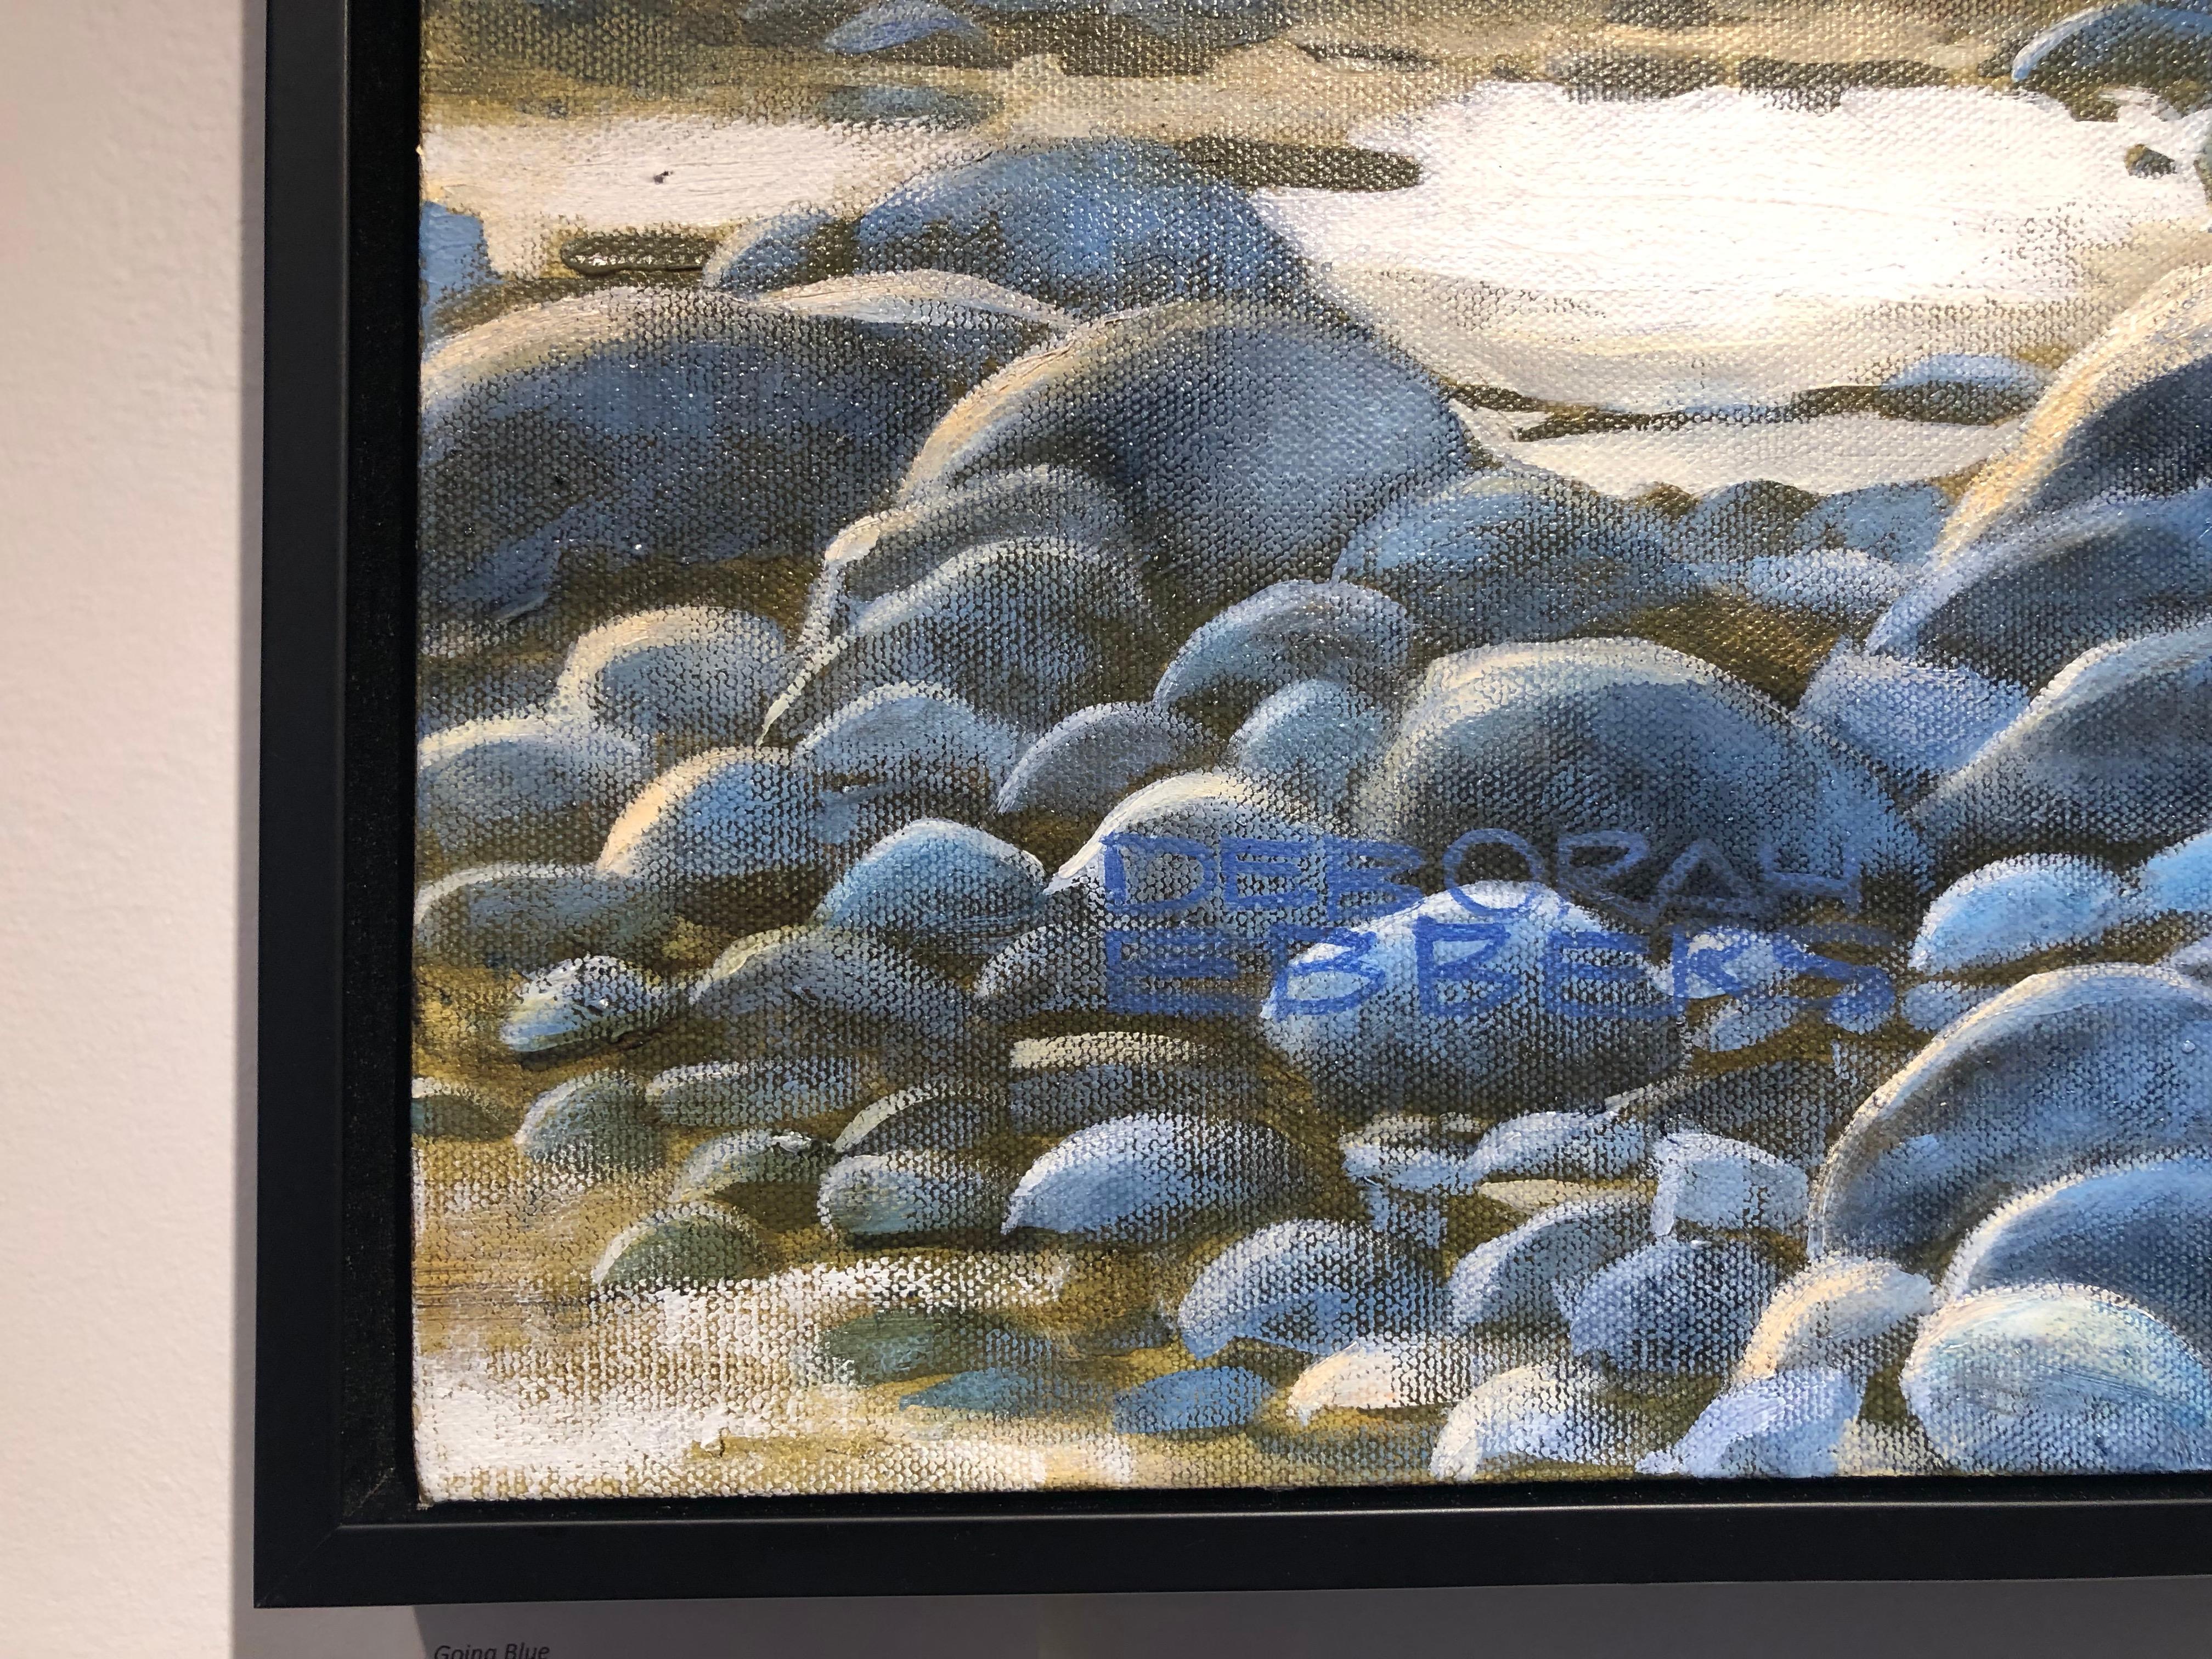 Going Blue - Original Oil on Canvas Painting with Water and Stones at the Shore 2